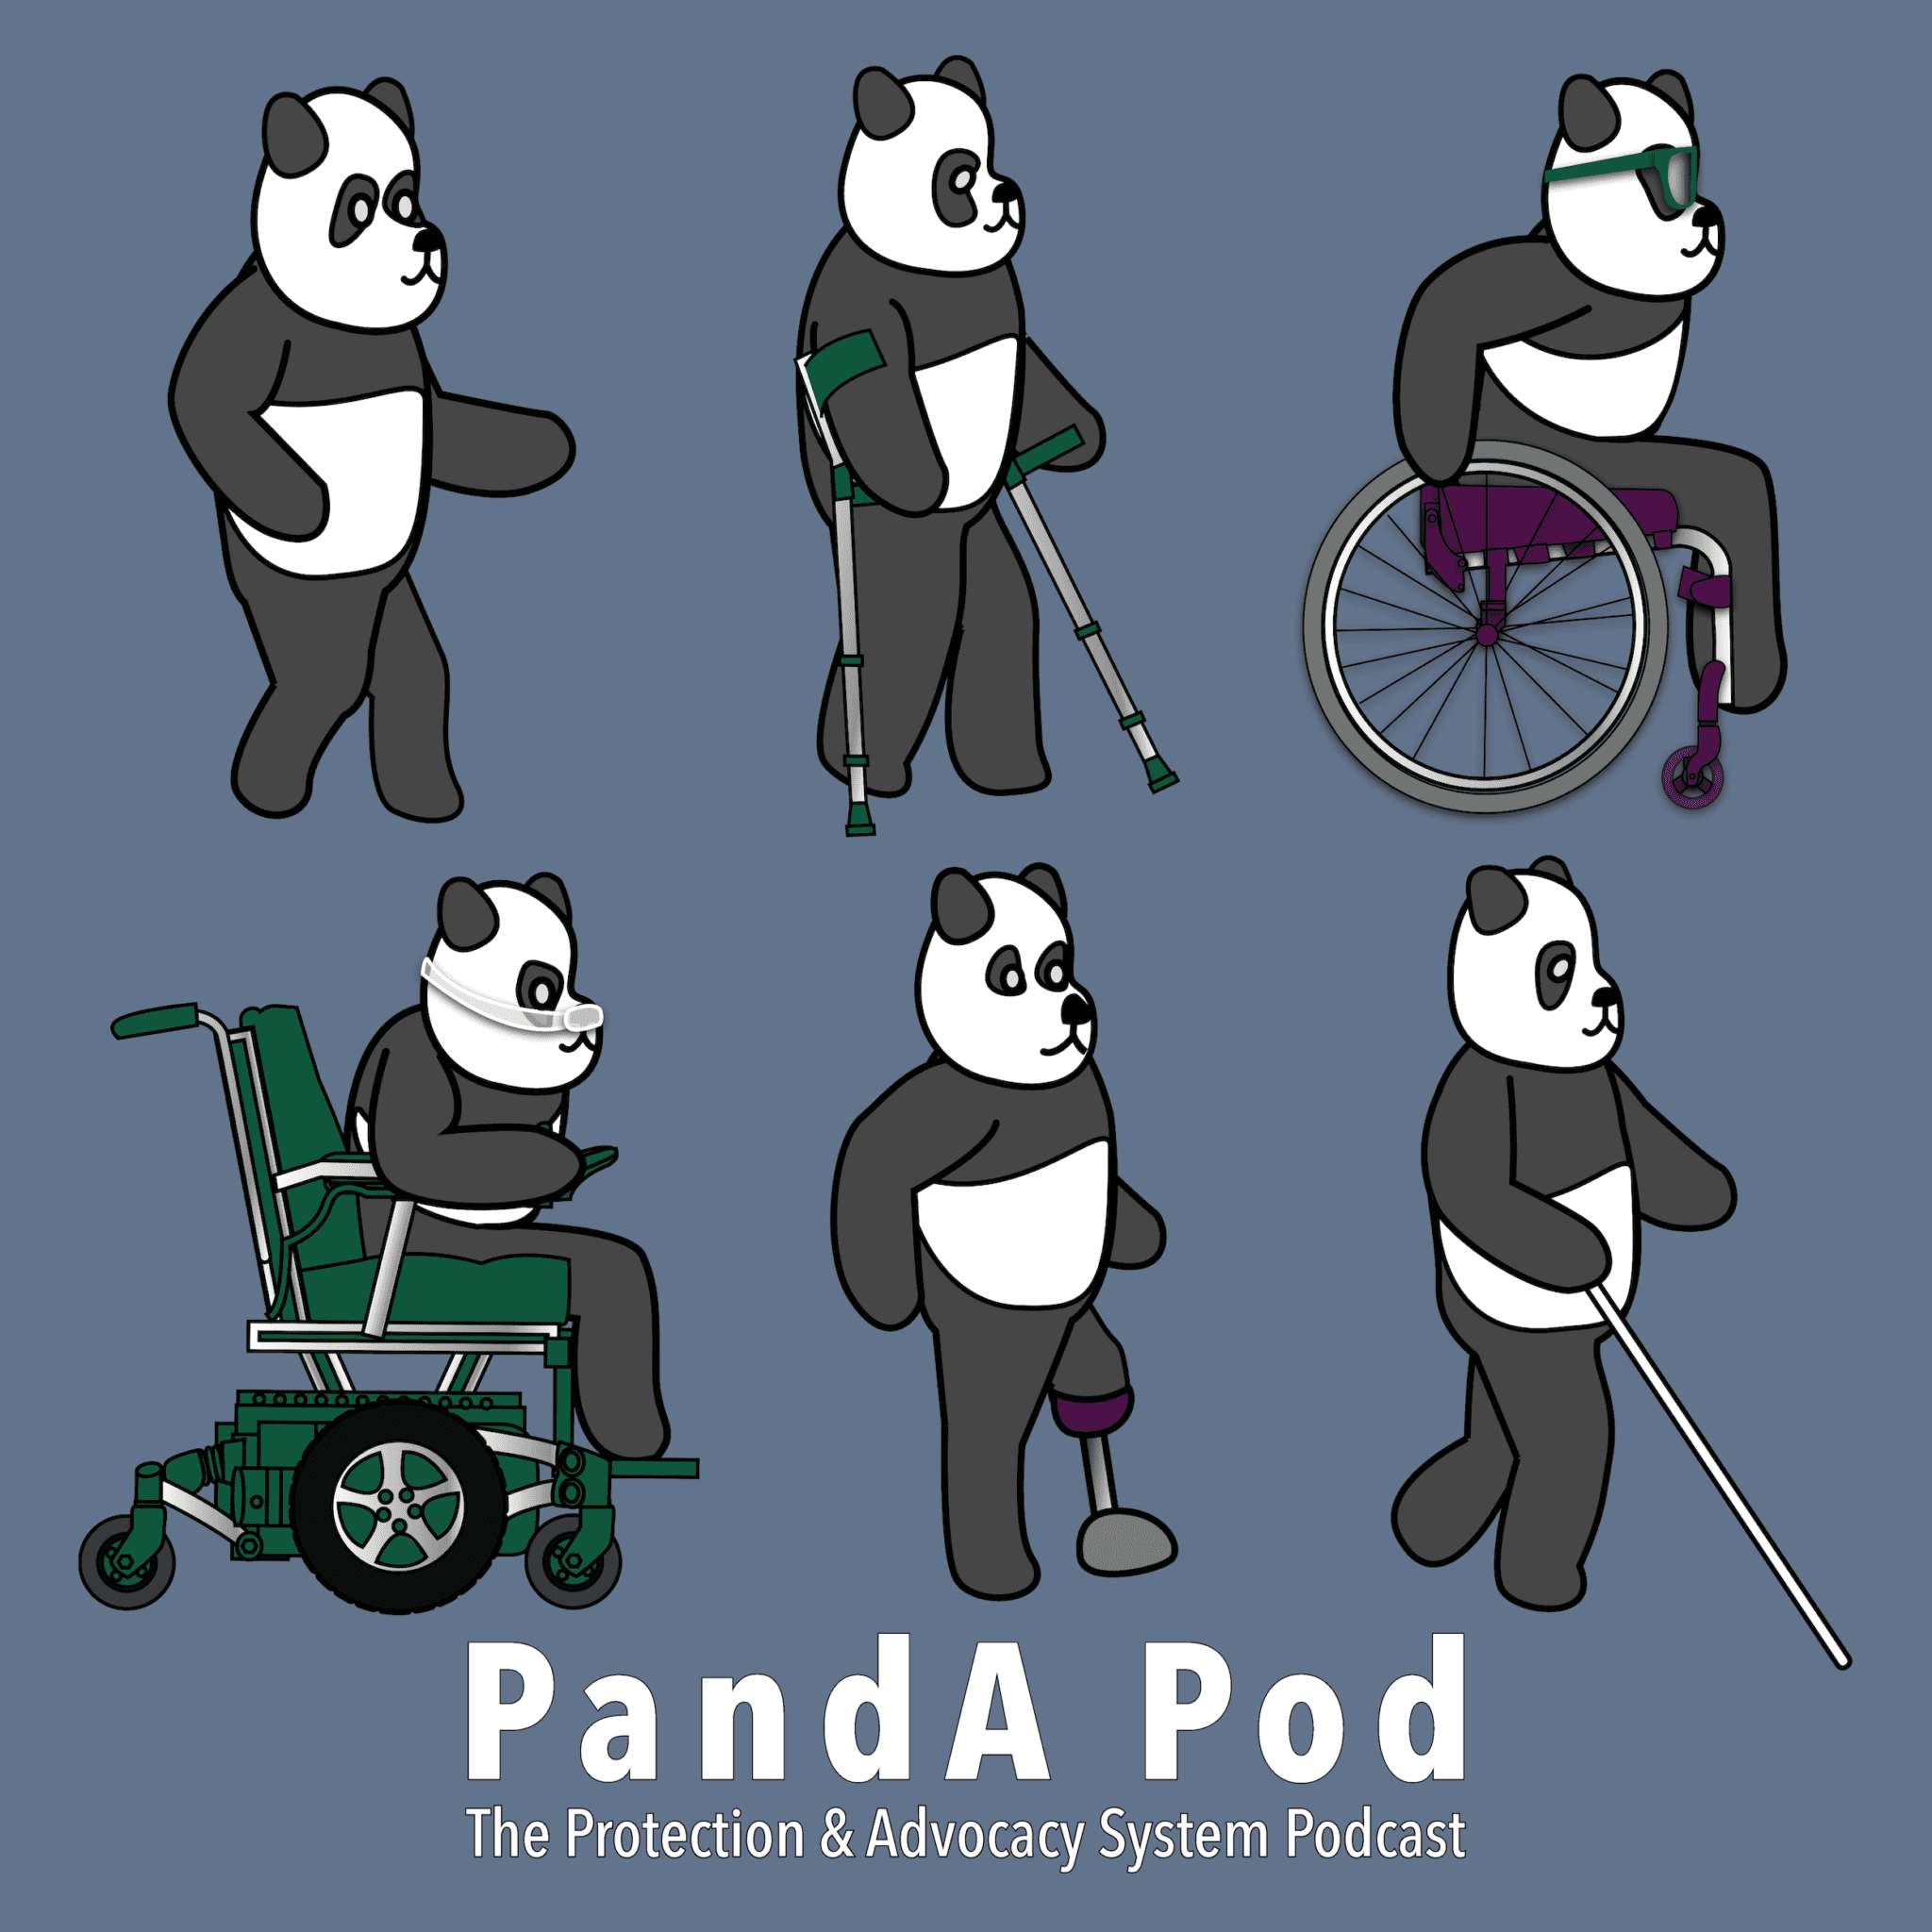 Pandas with different disabilities walking to the right. Artist Mike Mort.